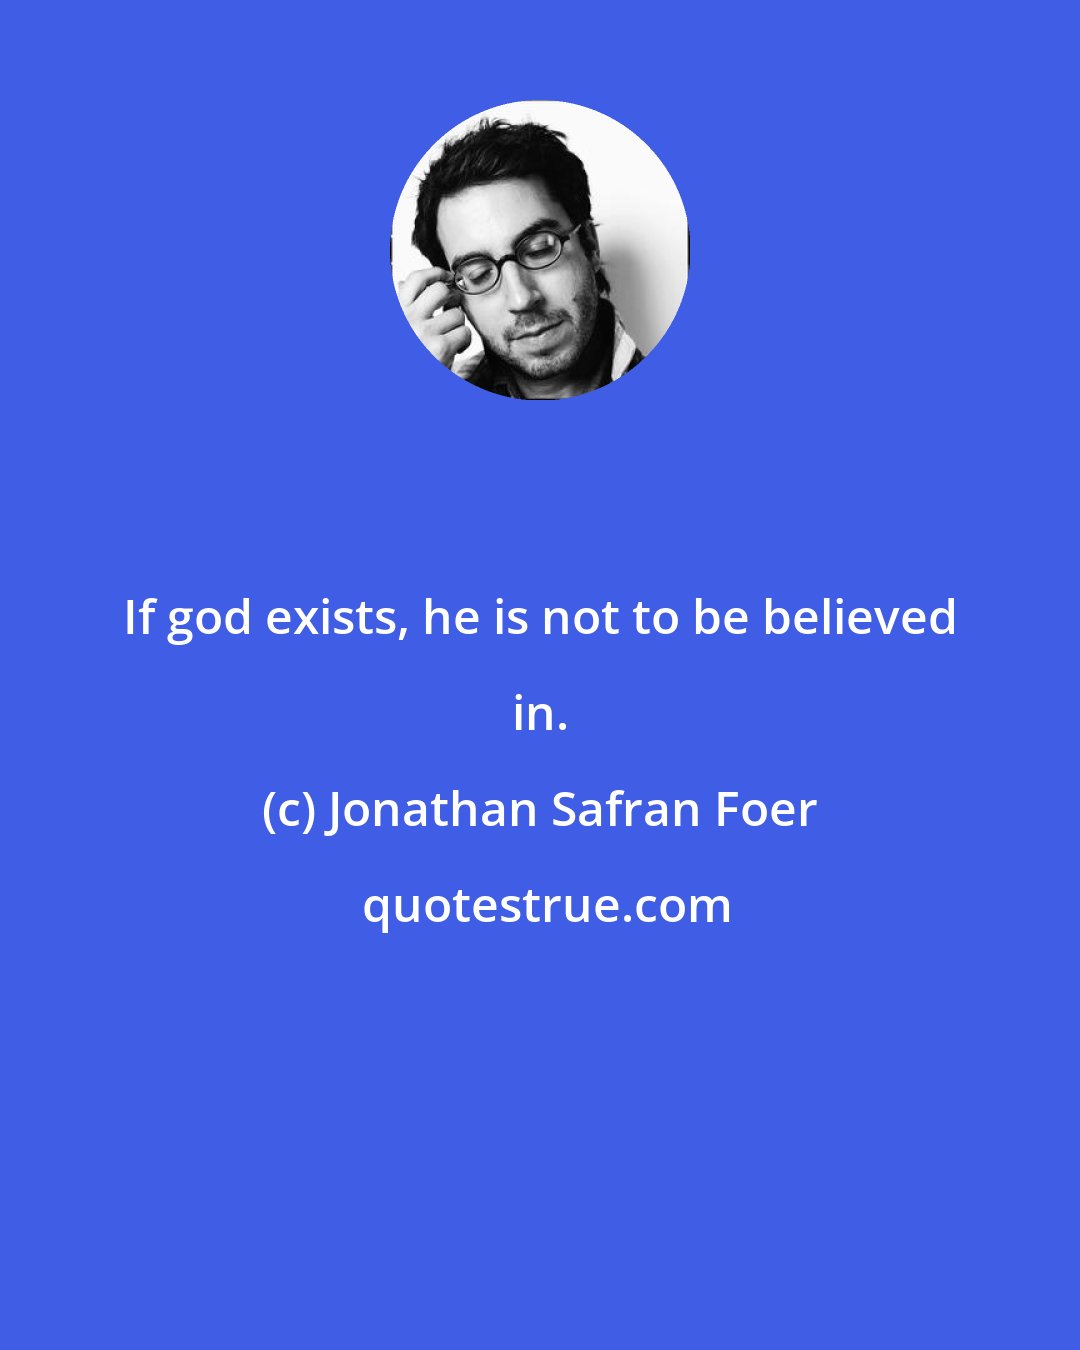 Jonathan Safran Foer: If god exists, he is not to be believed in.